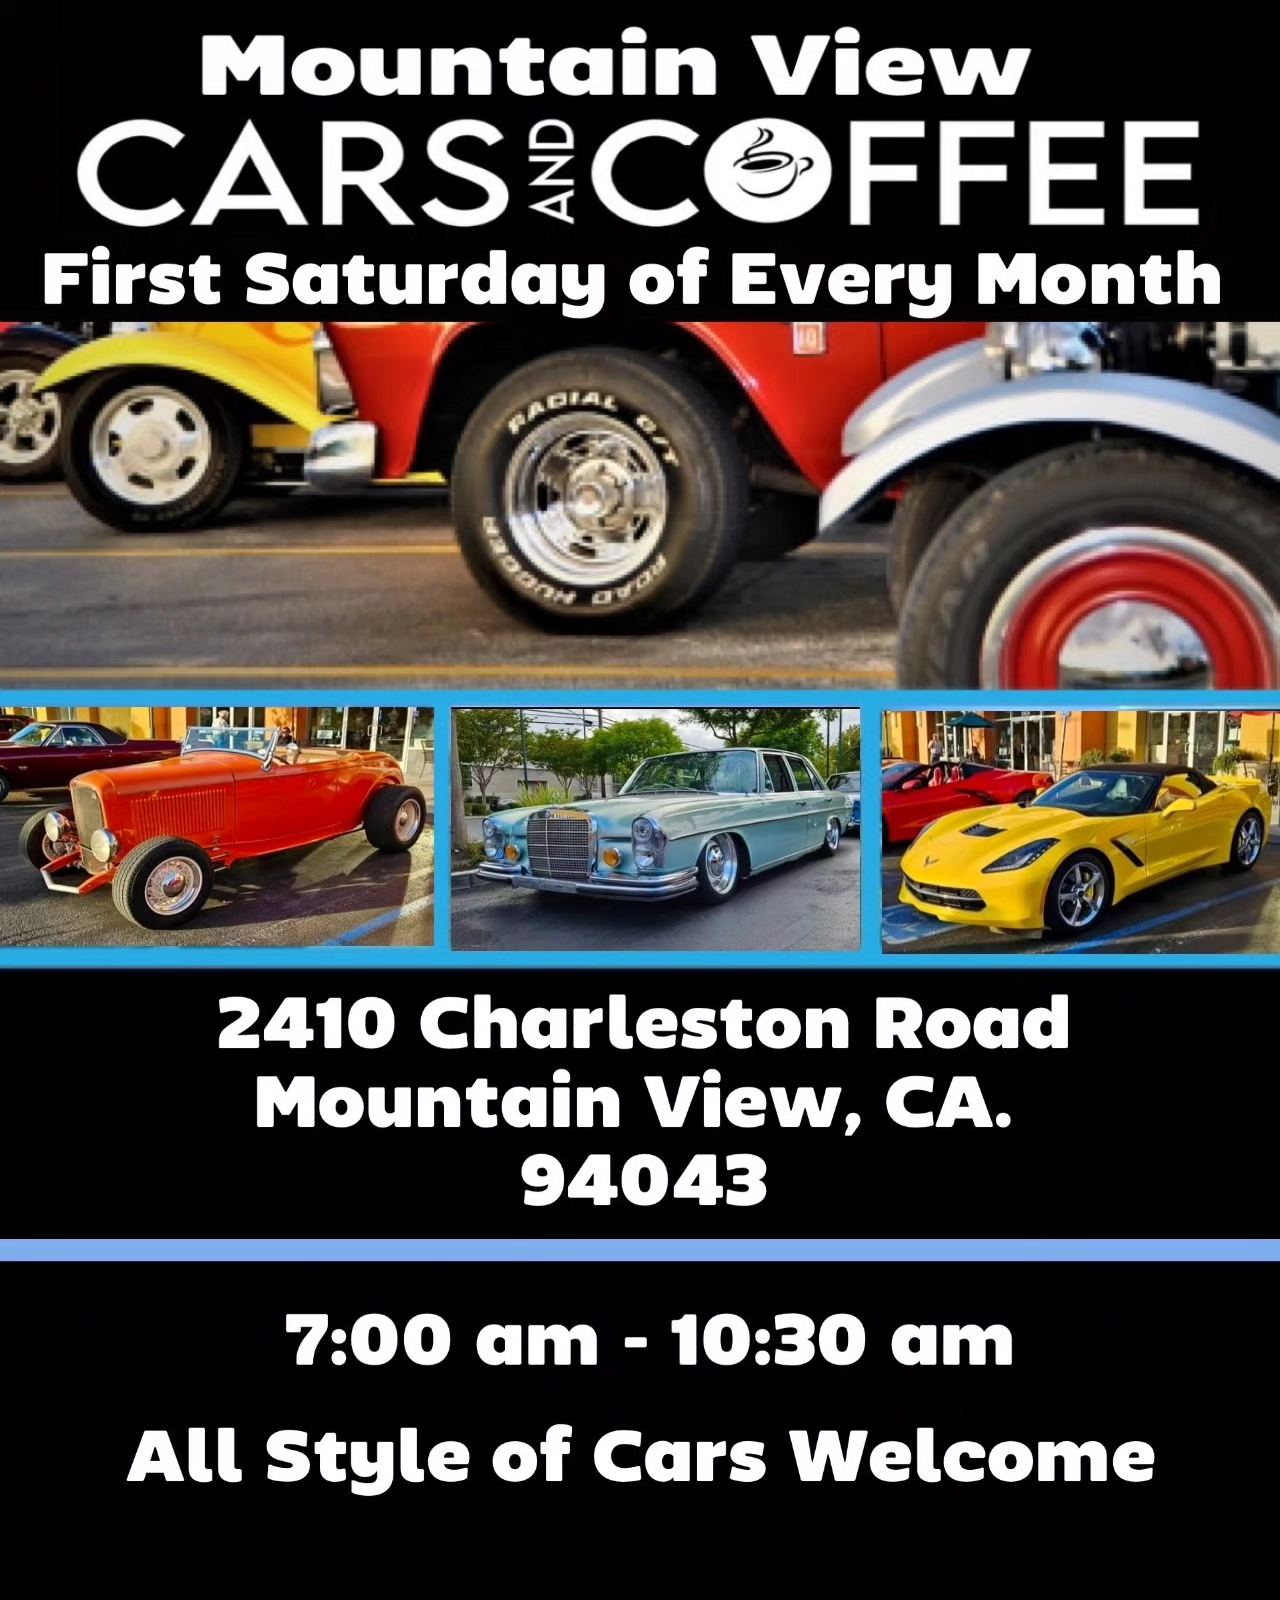 Mountain View Cars and Coffee